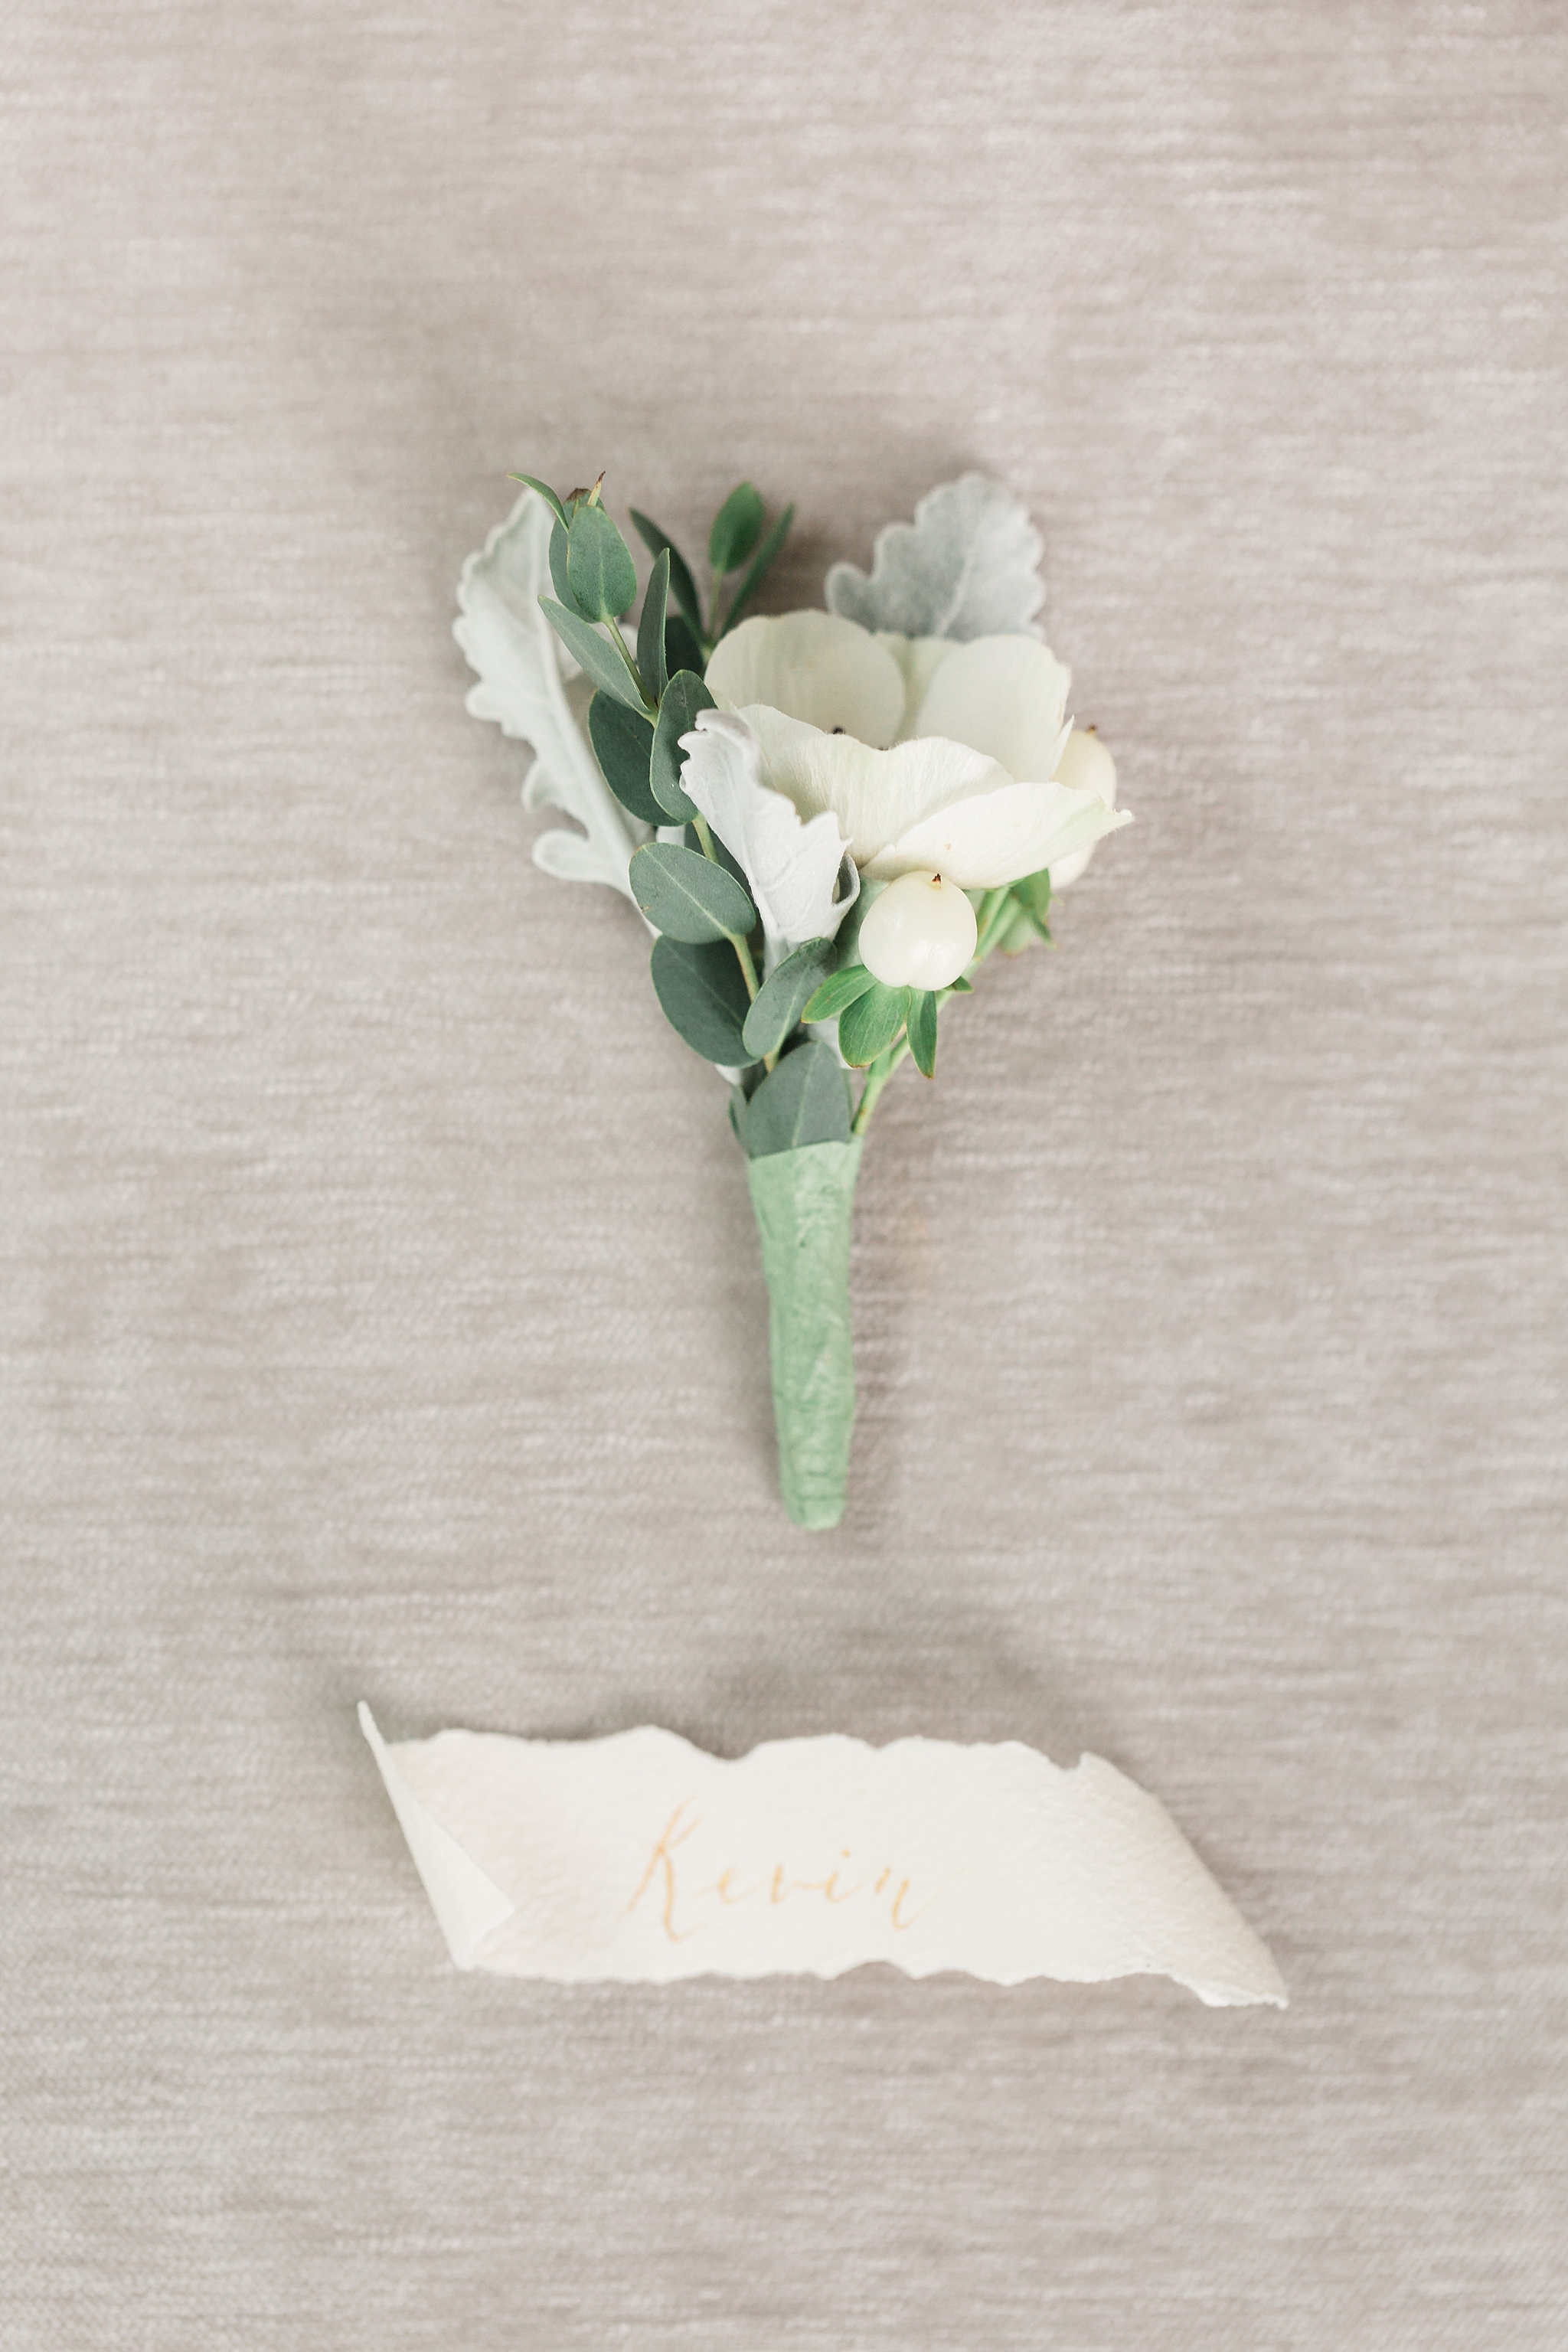 This elegant Rixey Manor wedding featured a soft color palette of blues, greys, and sage and was photographed by DC photographer, Alicia Lacey.